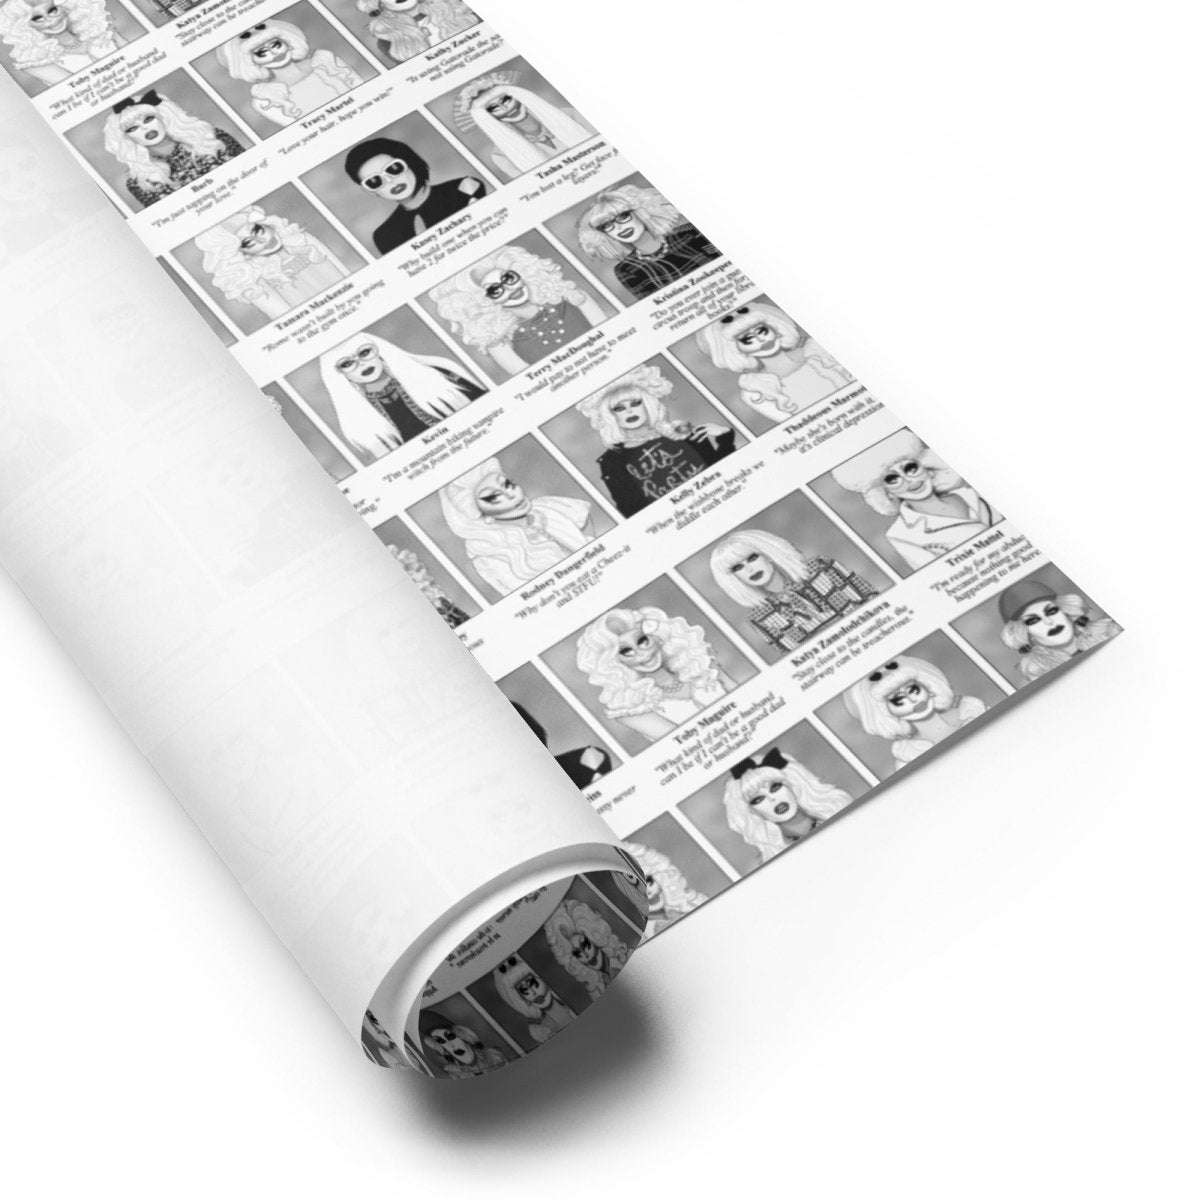 Trixie & Katya - Yearbook Wrapping paper sheets - dragqueenmerch